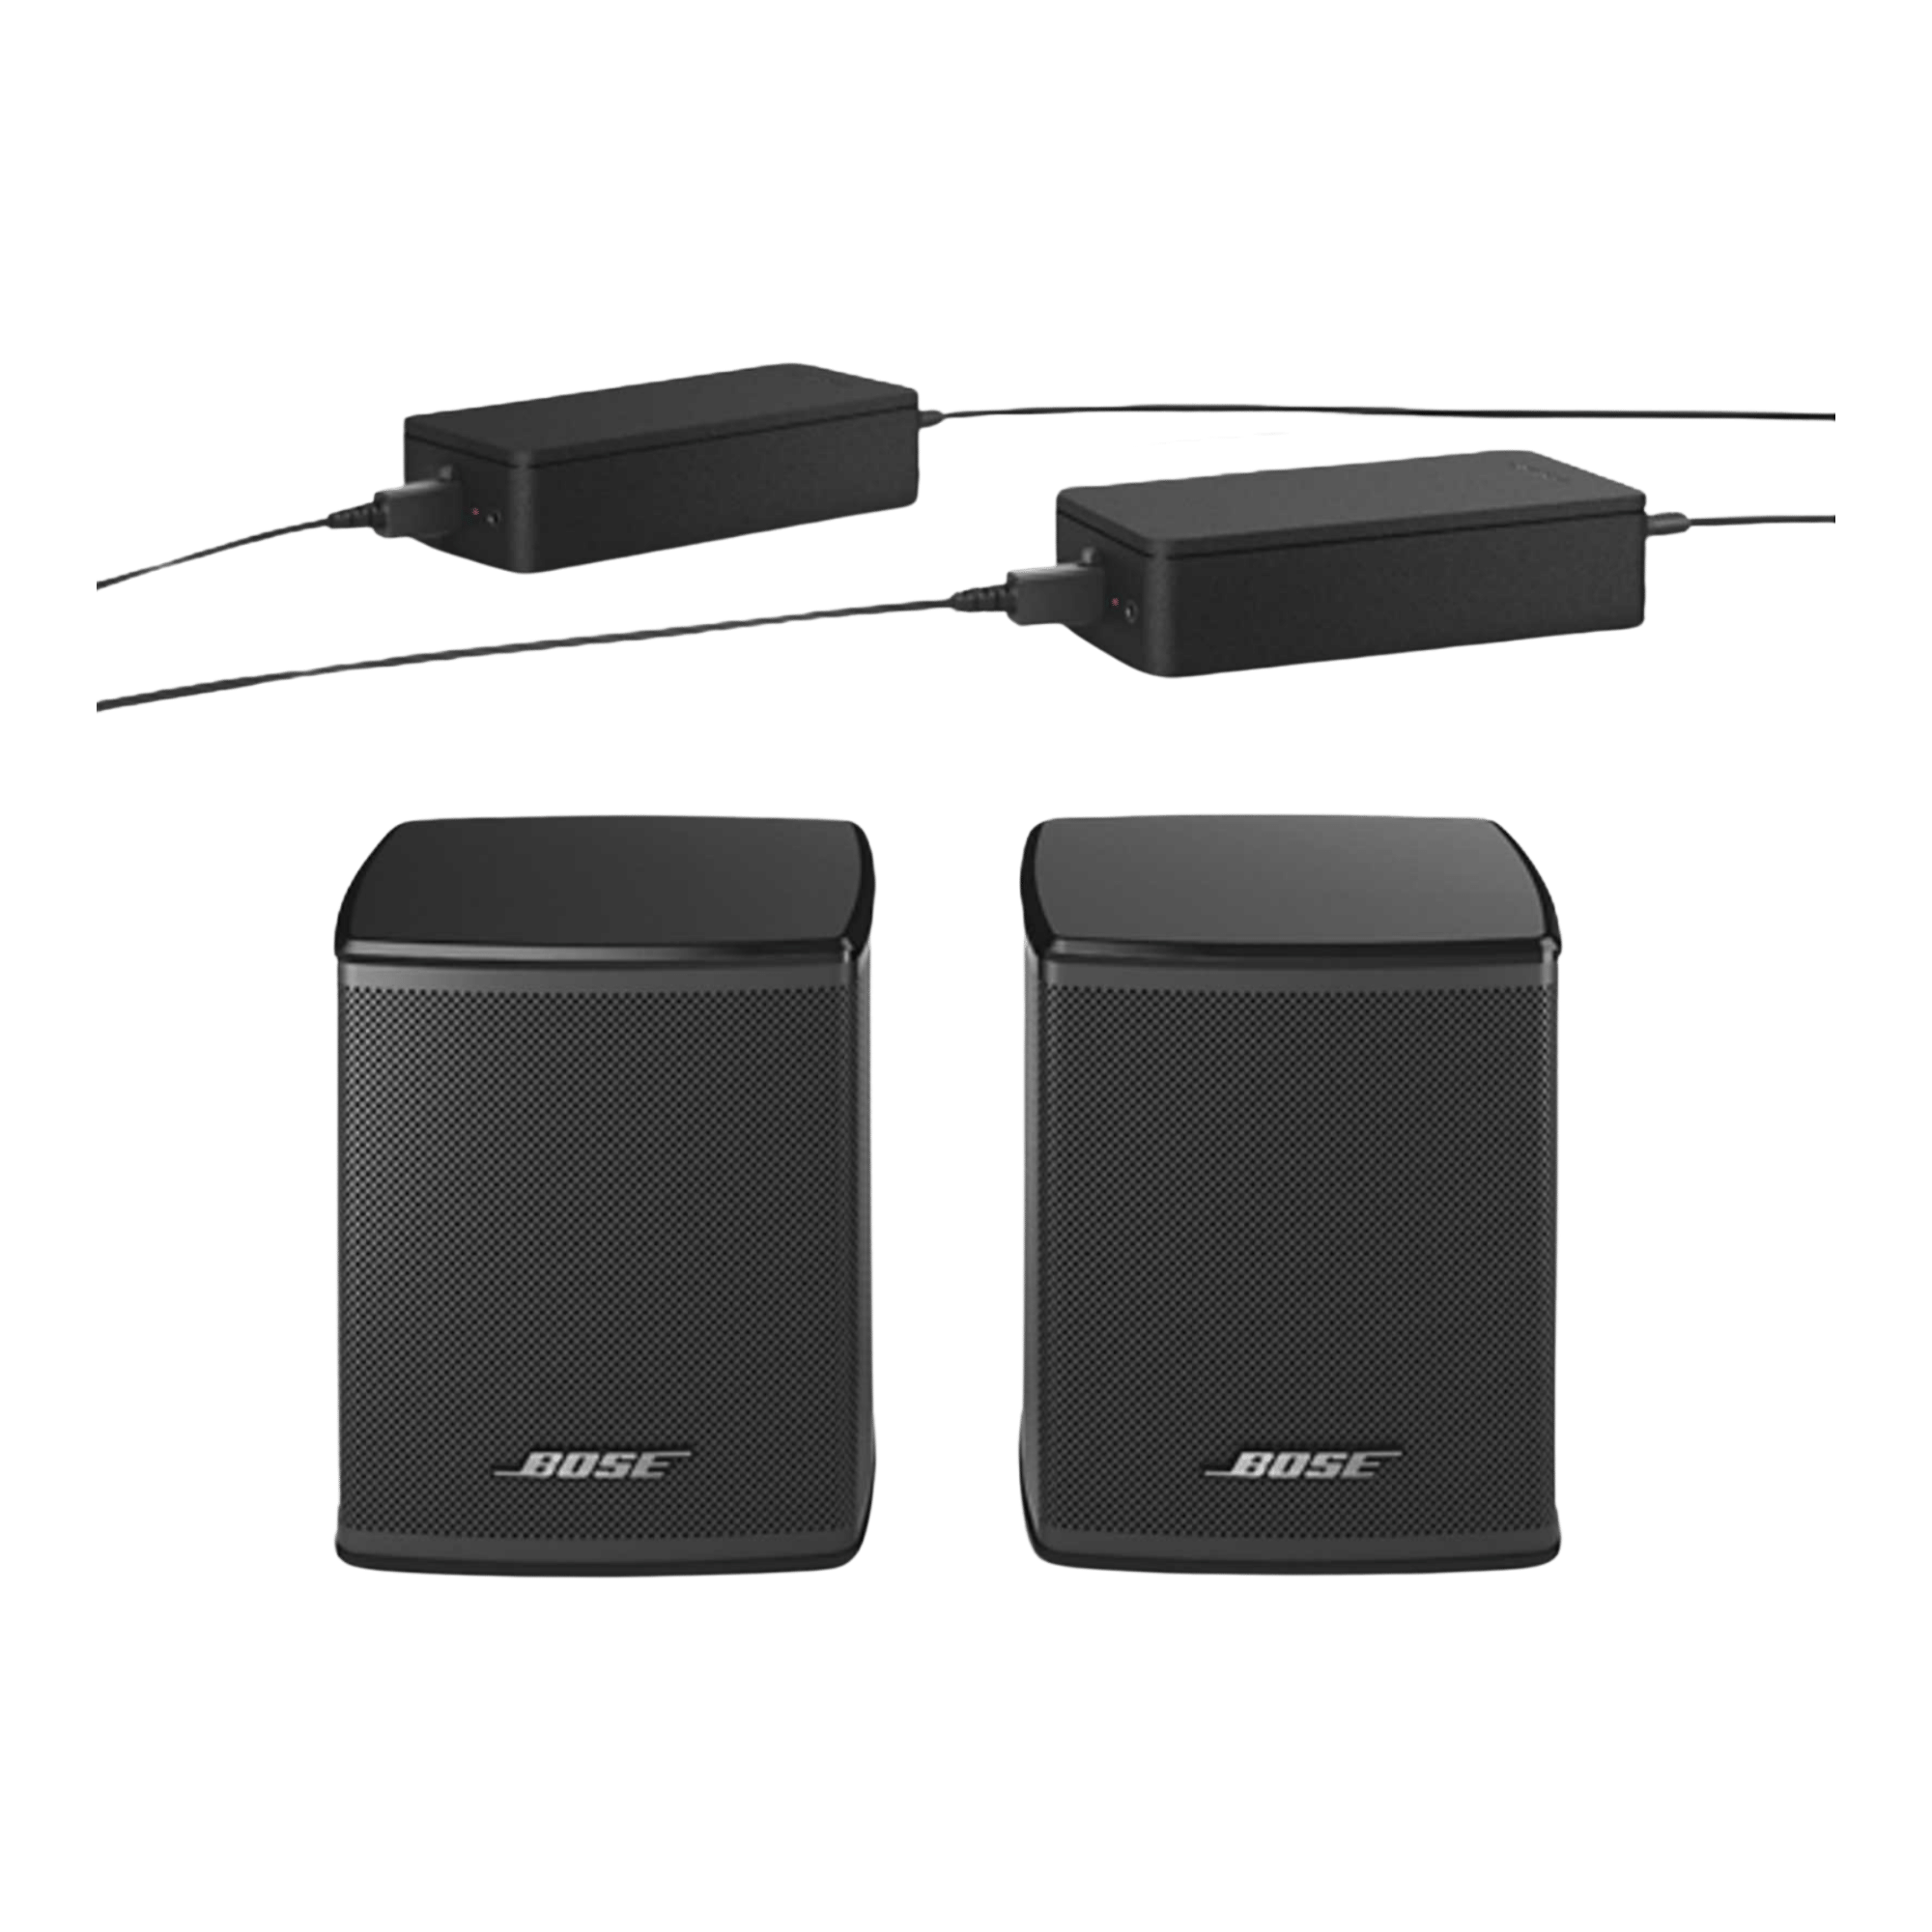 Buy Bose Surround Speakers at best prices